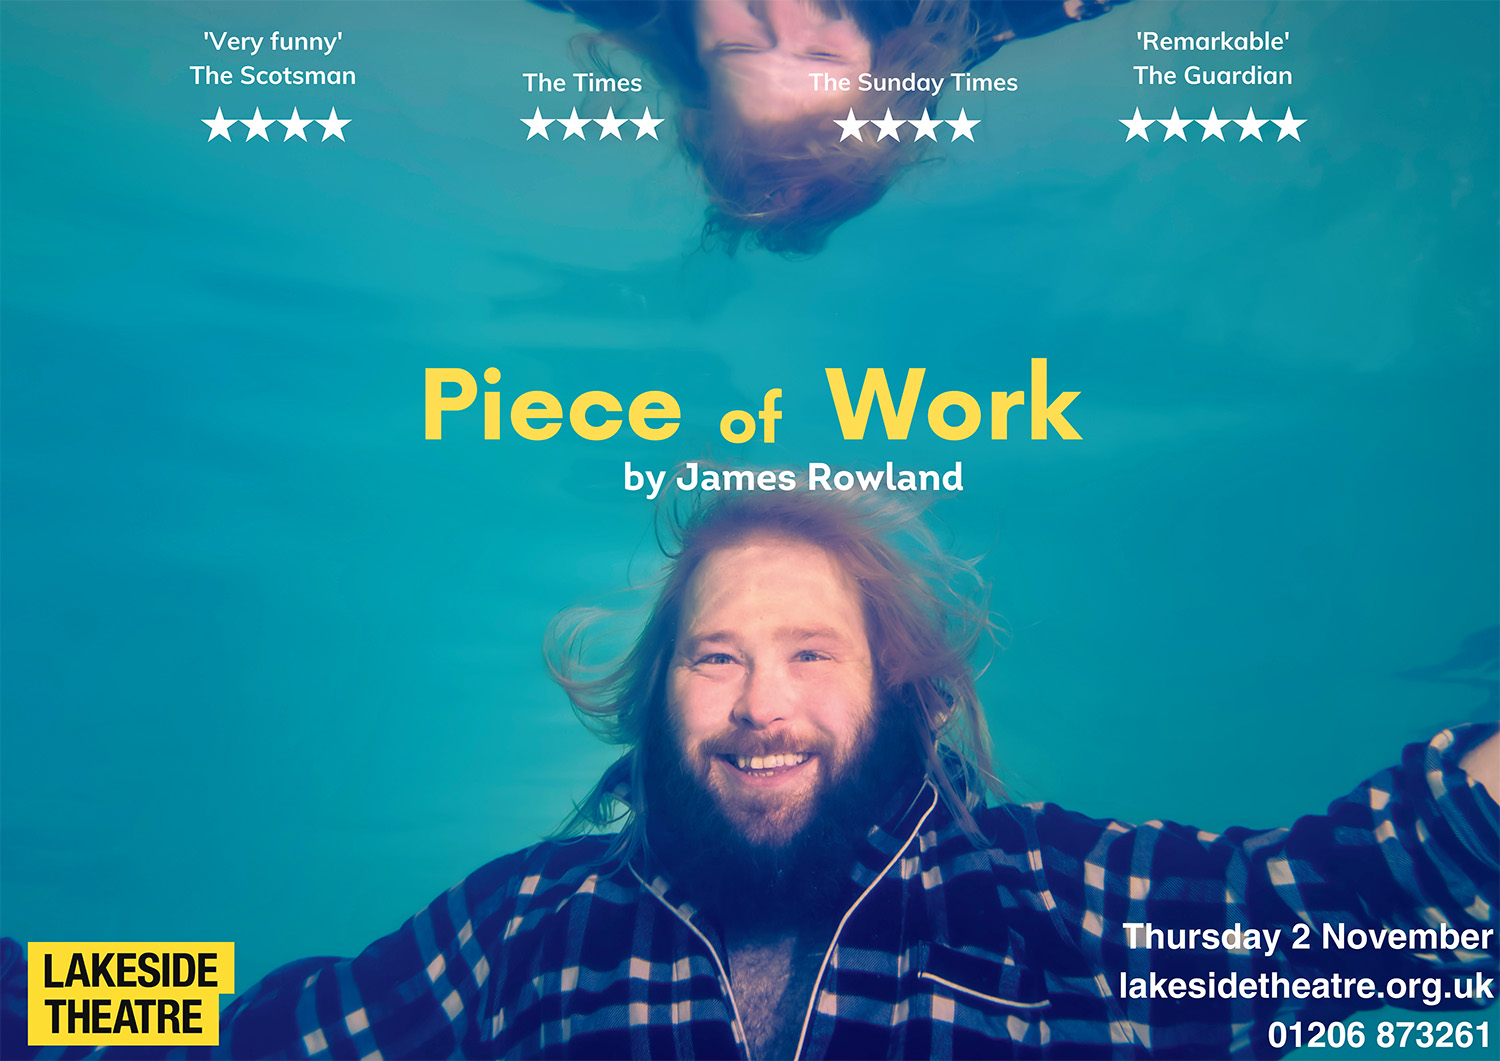 James Rowland underwater with his reflection as a promo for his show, Piece of Work.